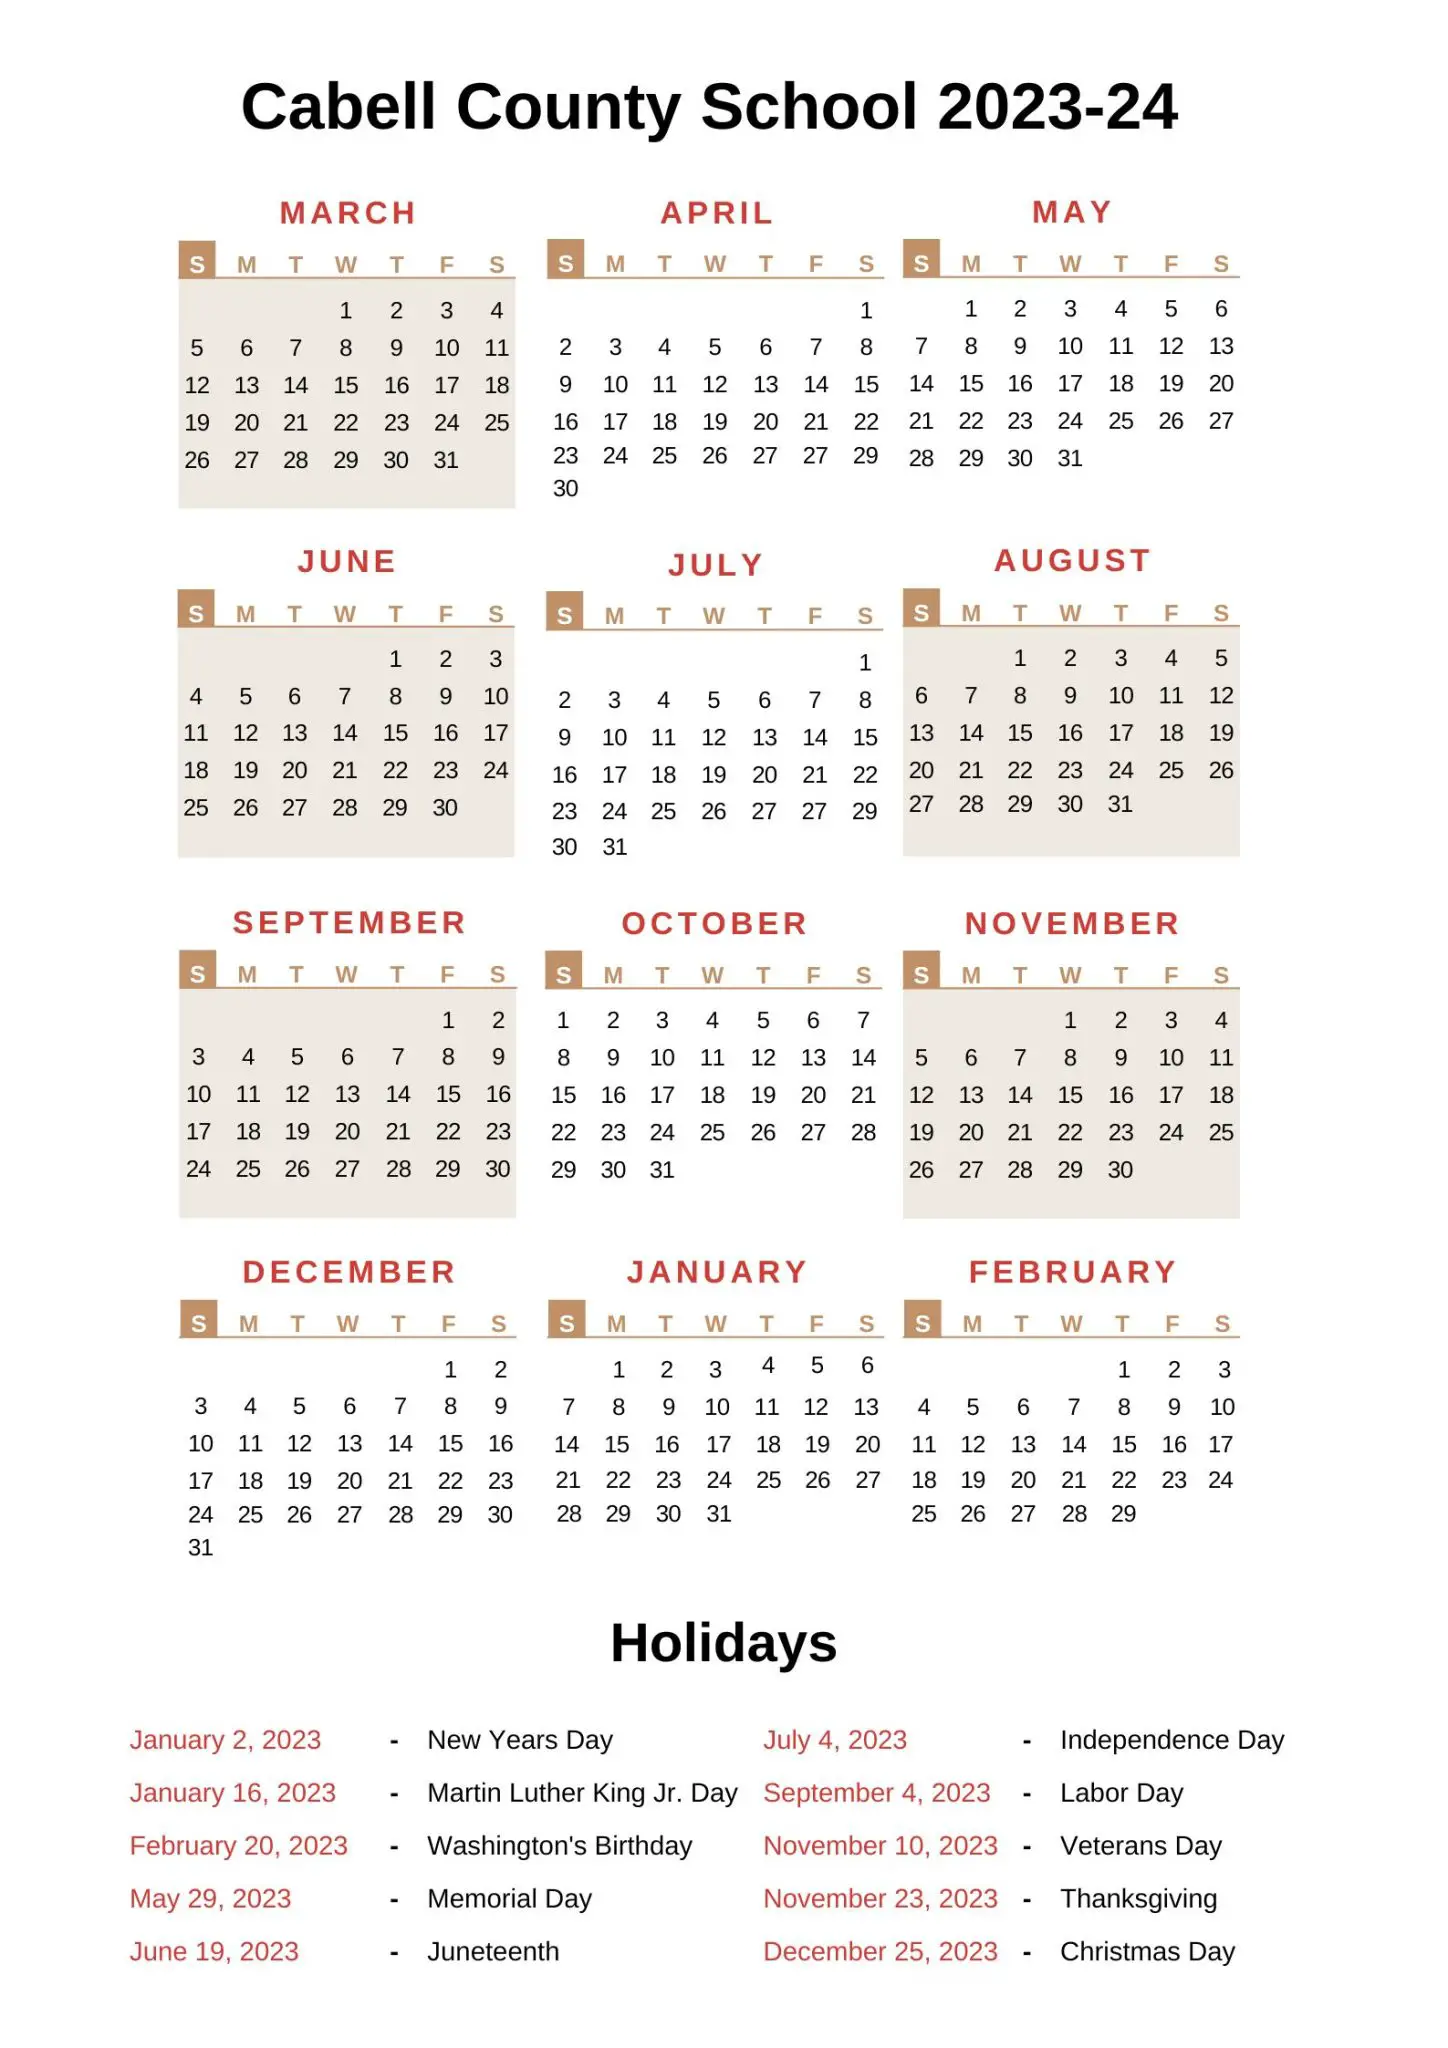 Cabell County Schools Calendar [CCS] 202324 with Holidays